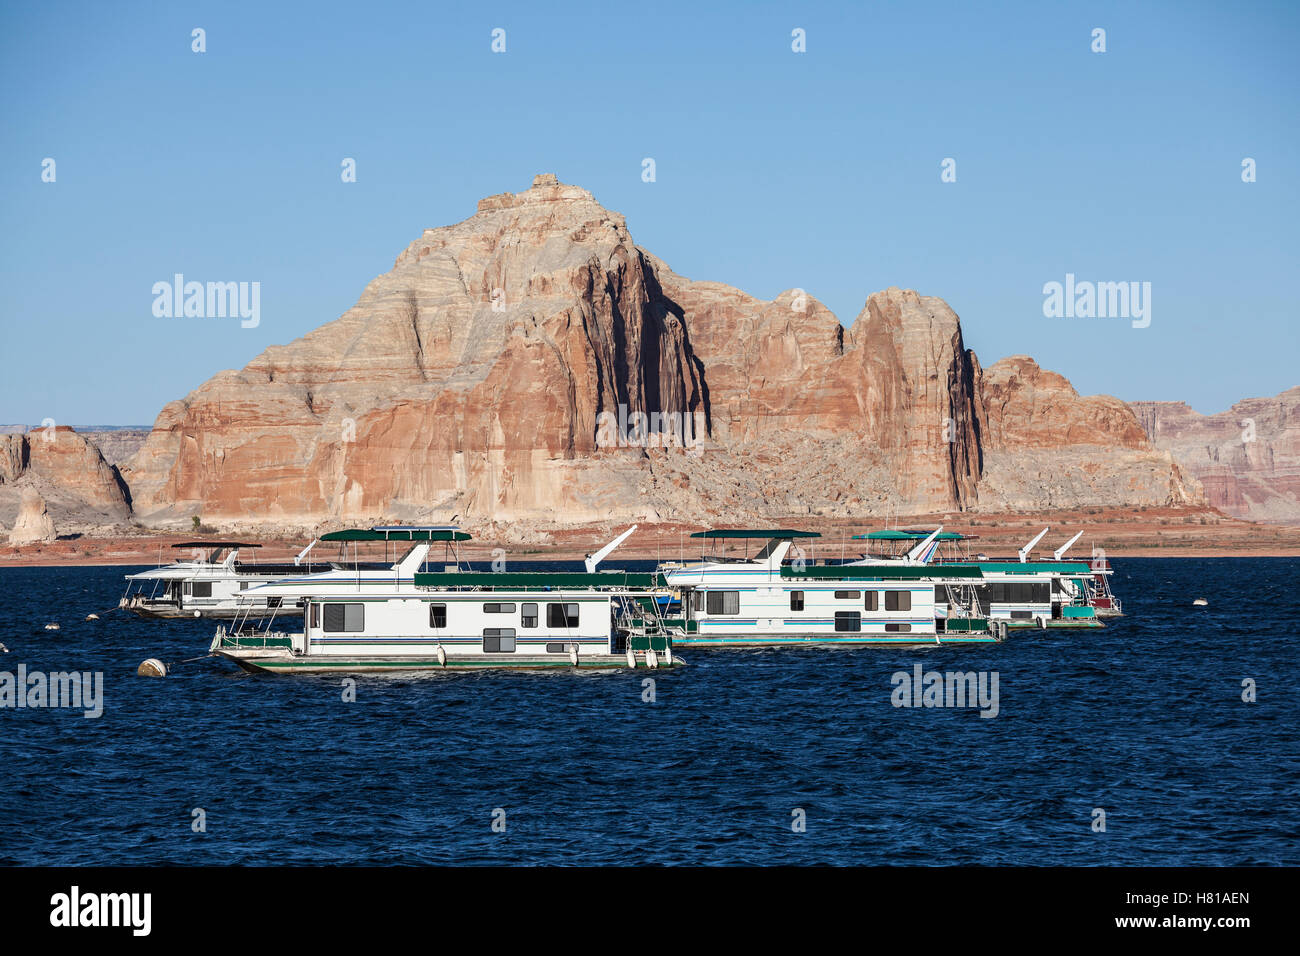 Desert sandstone peaks and houseboats on Lake Powell in the Glen Canyon National Recreation Area. Stock Photo